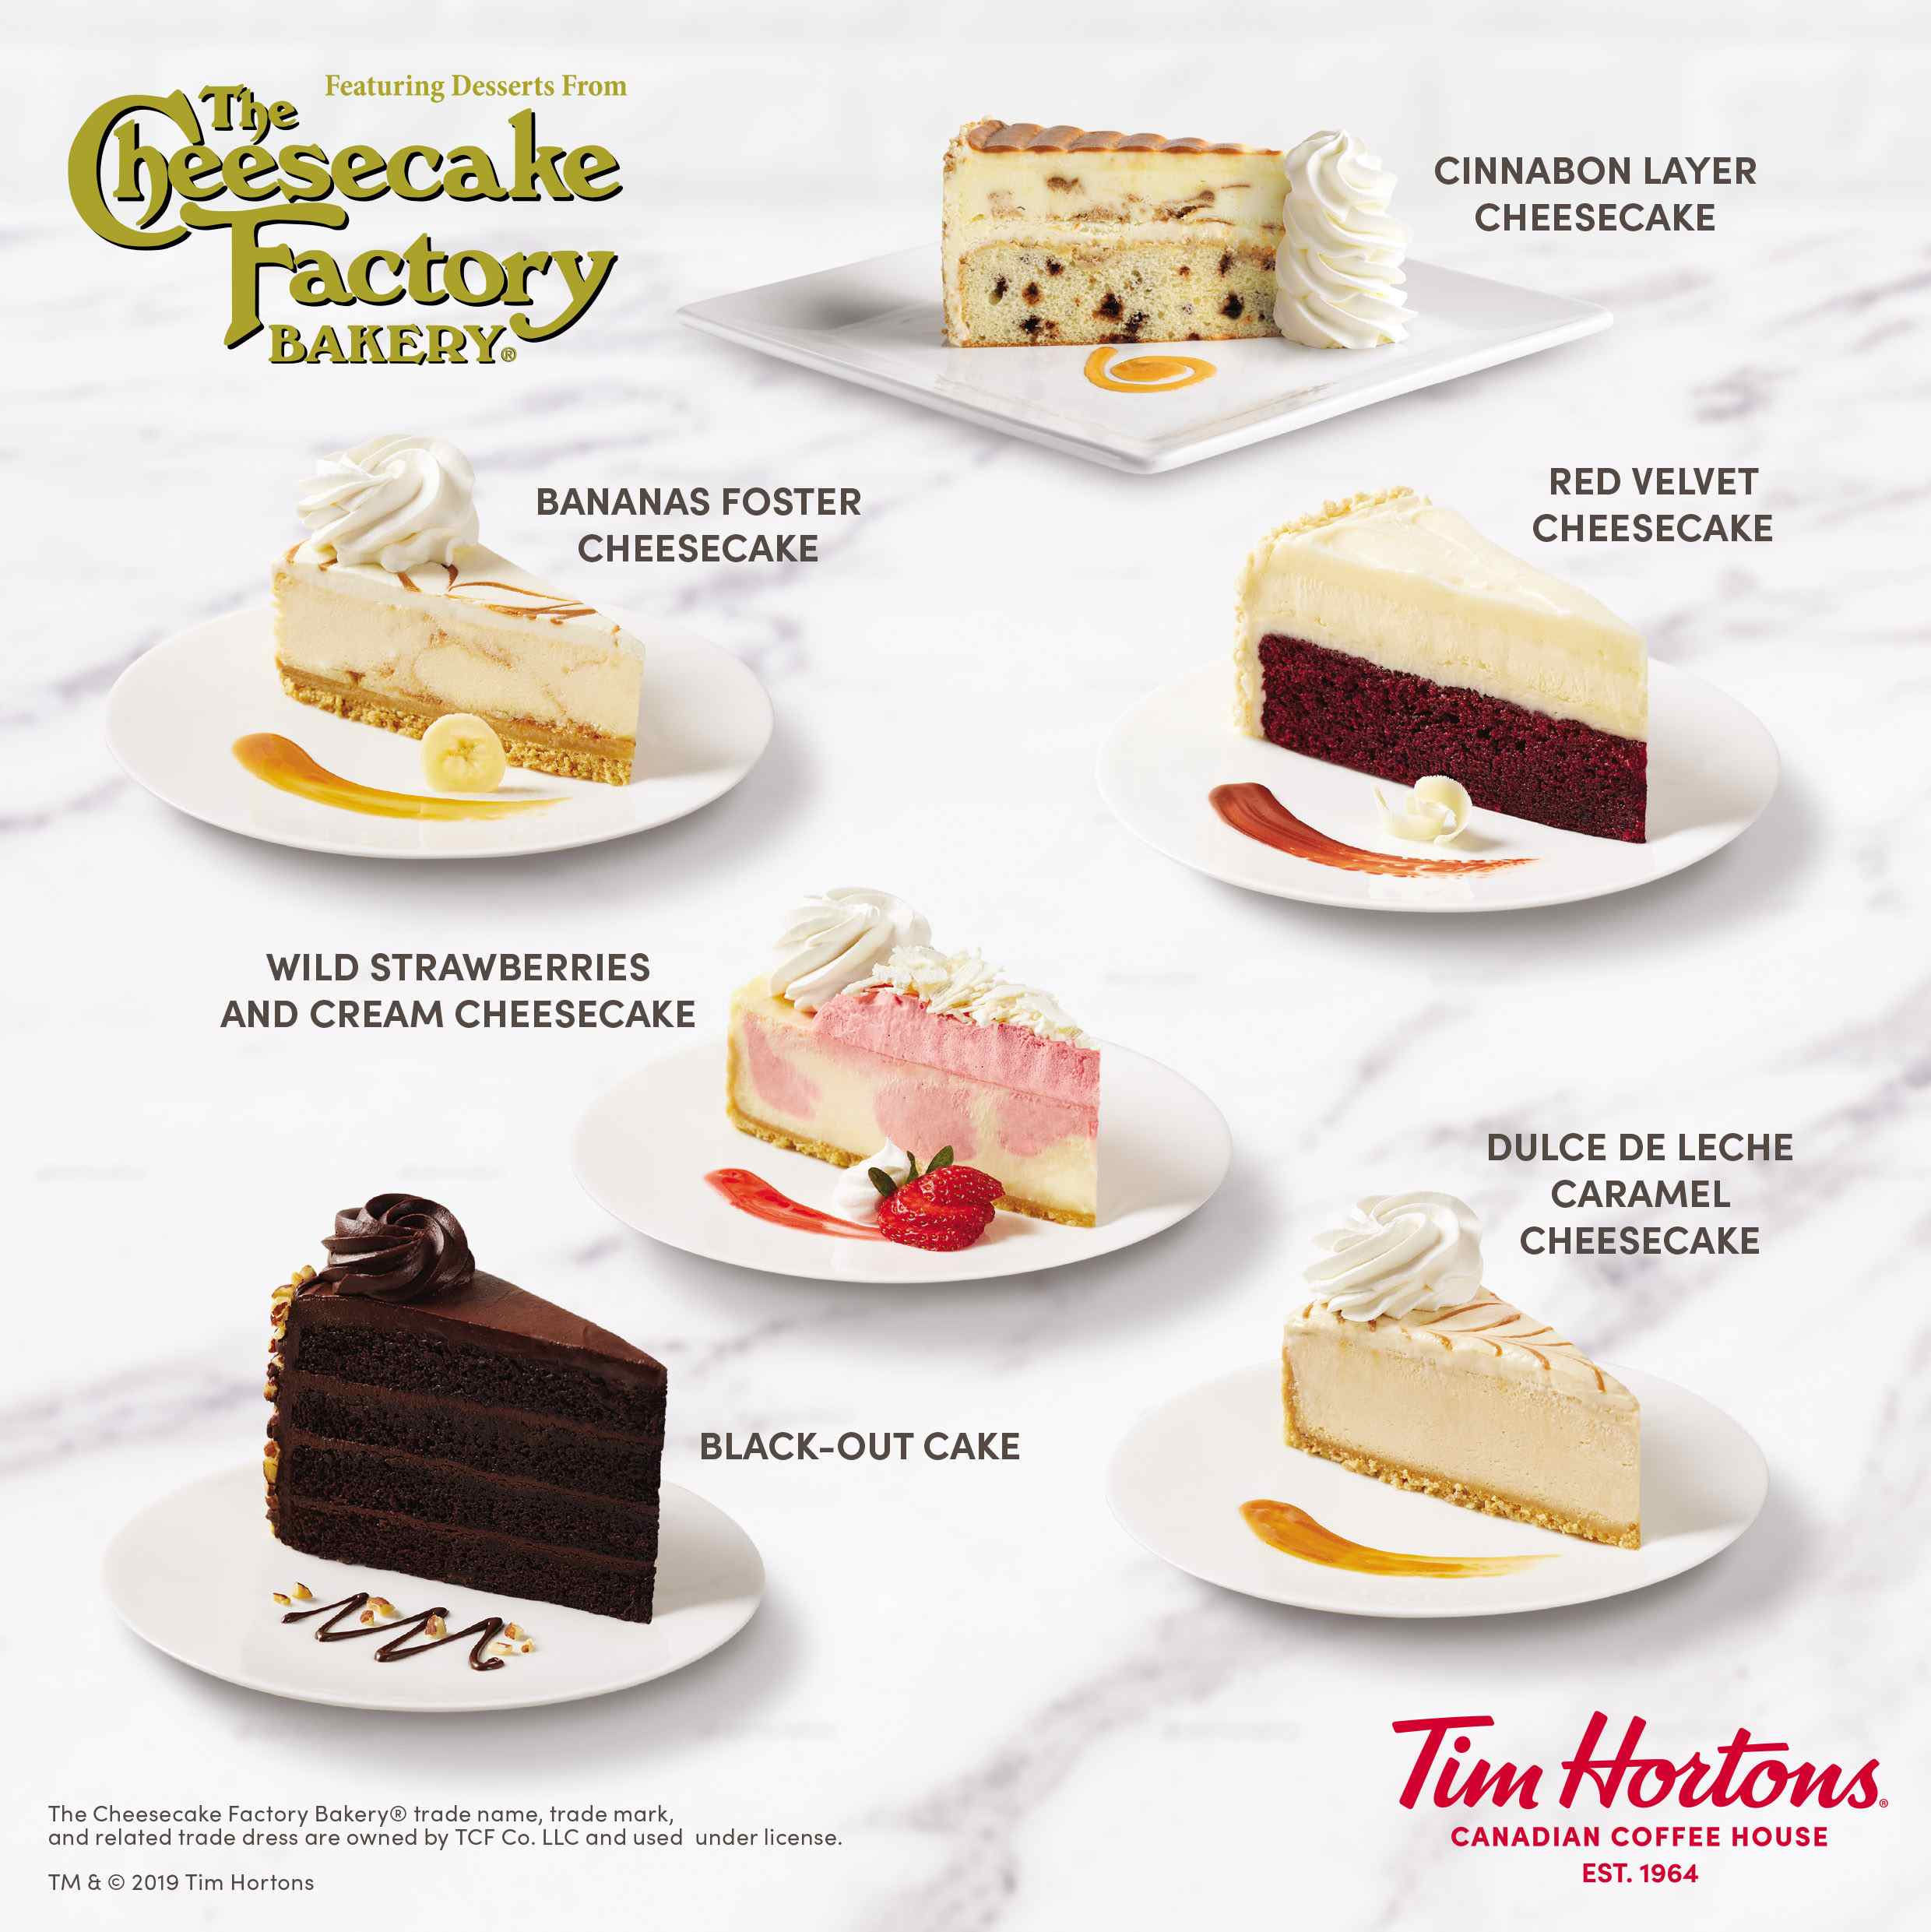 LOOK: Tim Hortons sells The Cheesecake Factory cakes now.